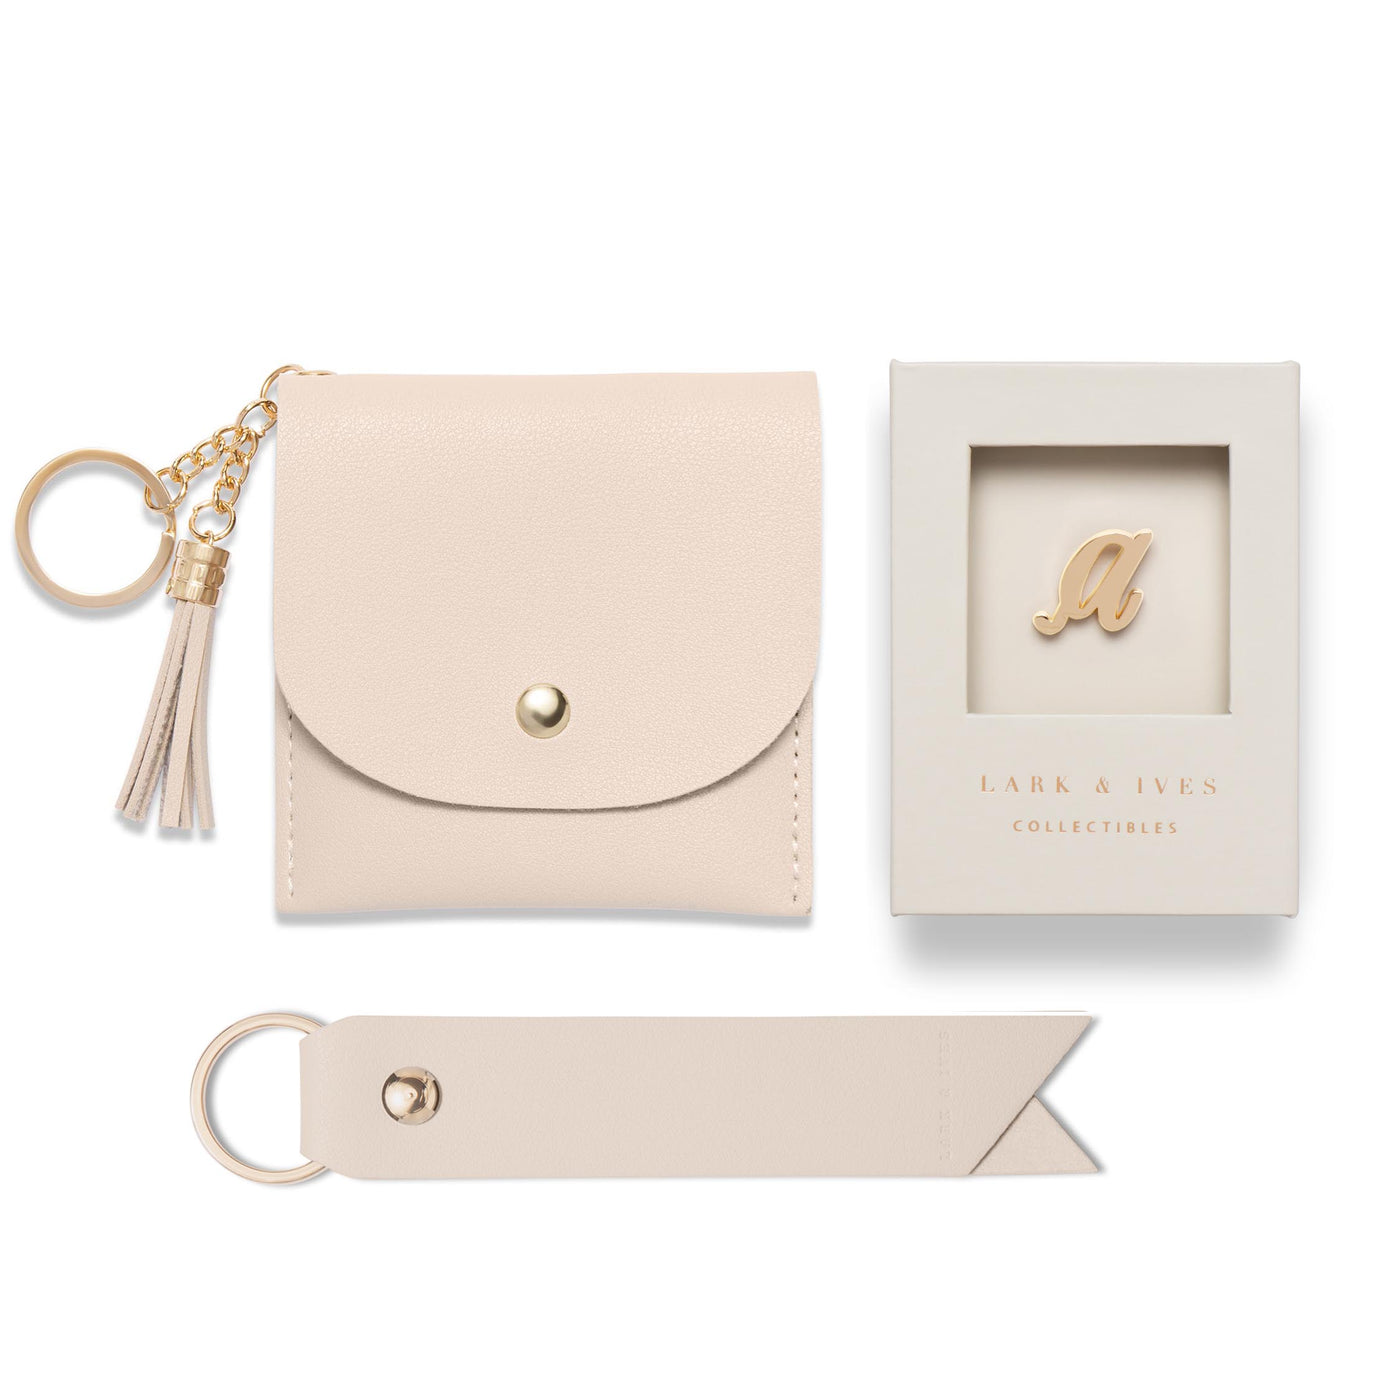 Card Purse with Accessories Bundle